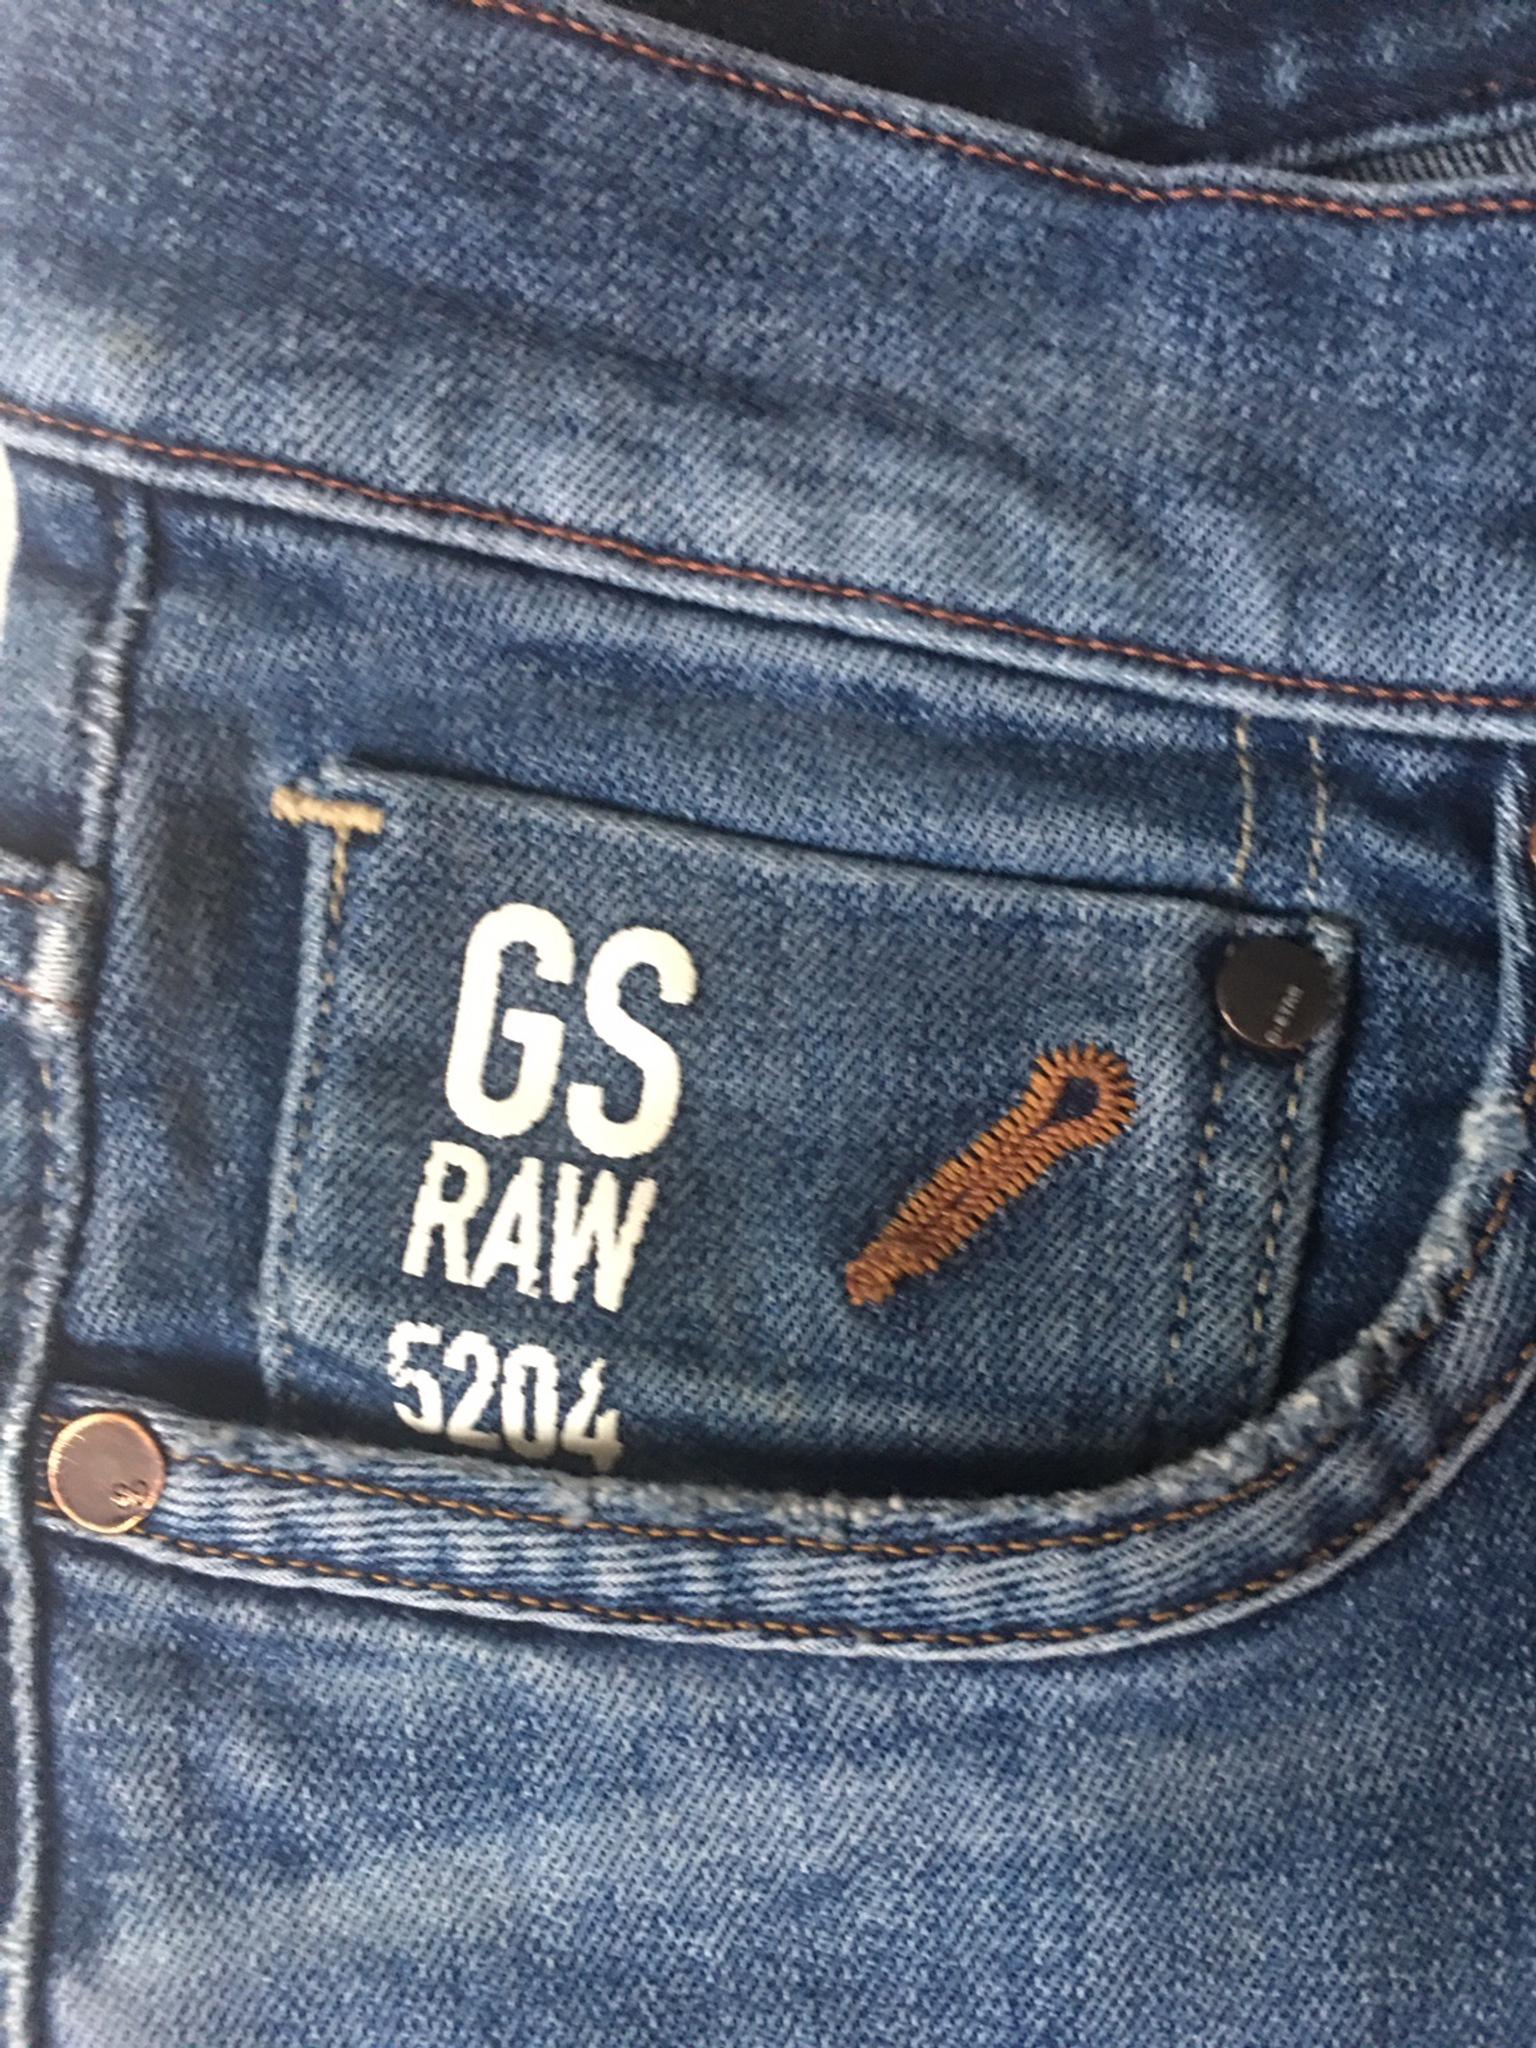 G Star Raw 5204 Jeans in London for £12 